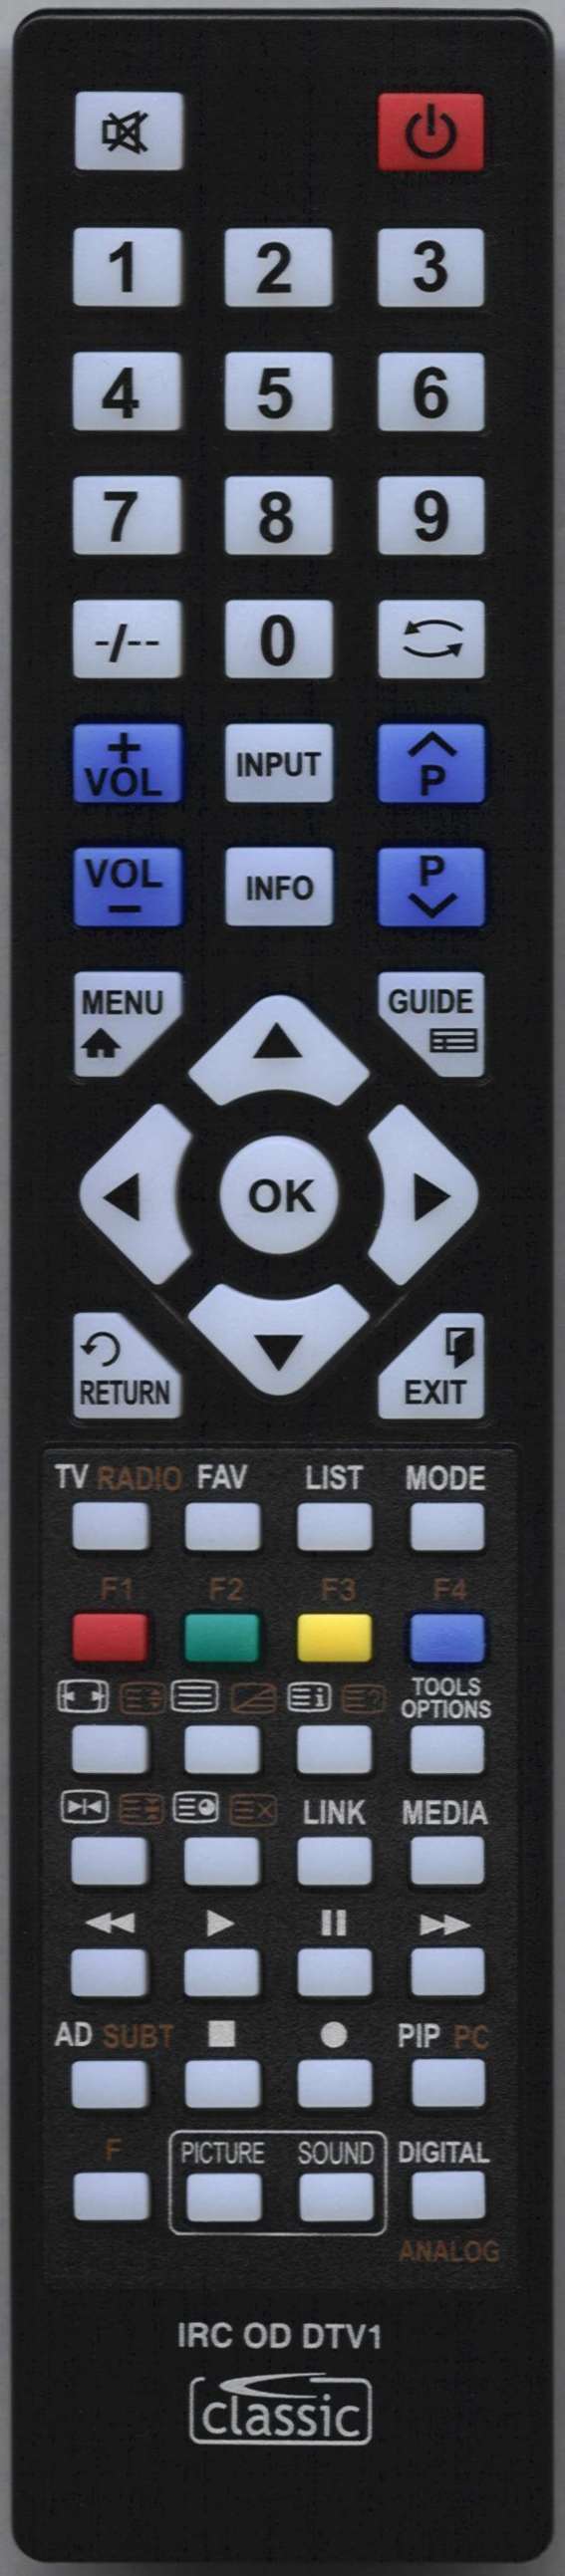 ACOUSTIC SOLUTIONS LCD26805HD Remote Control Alternative